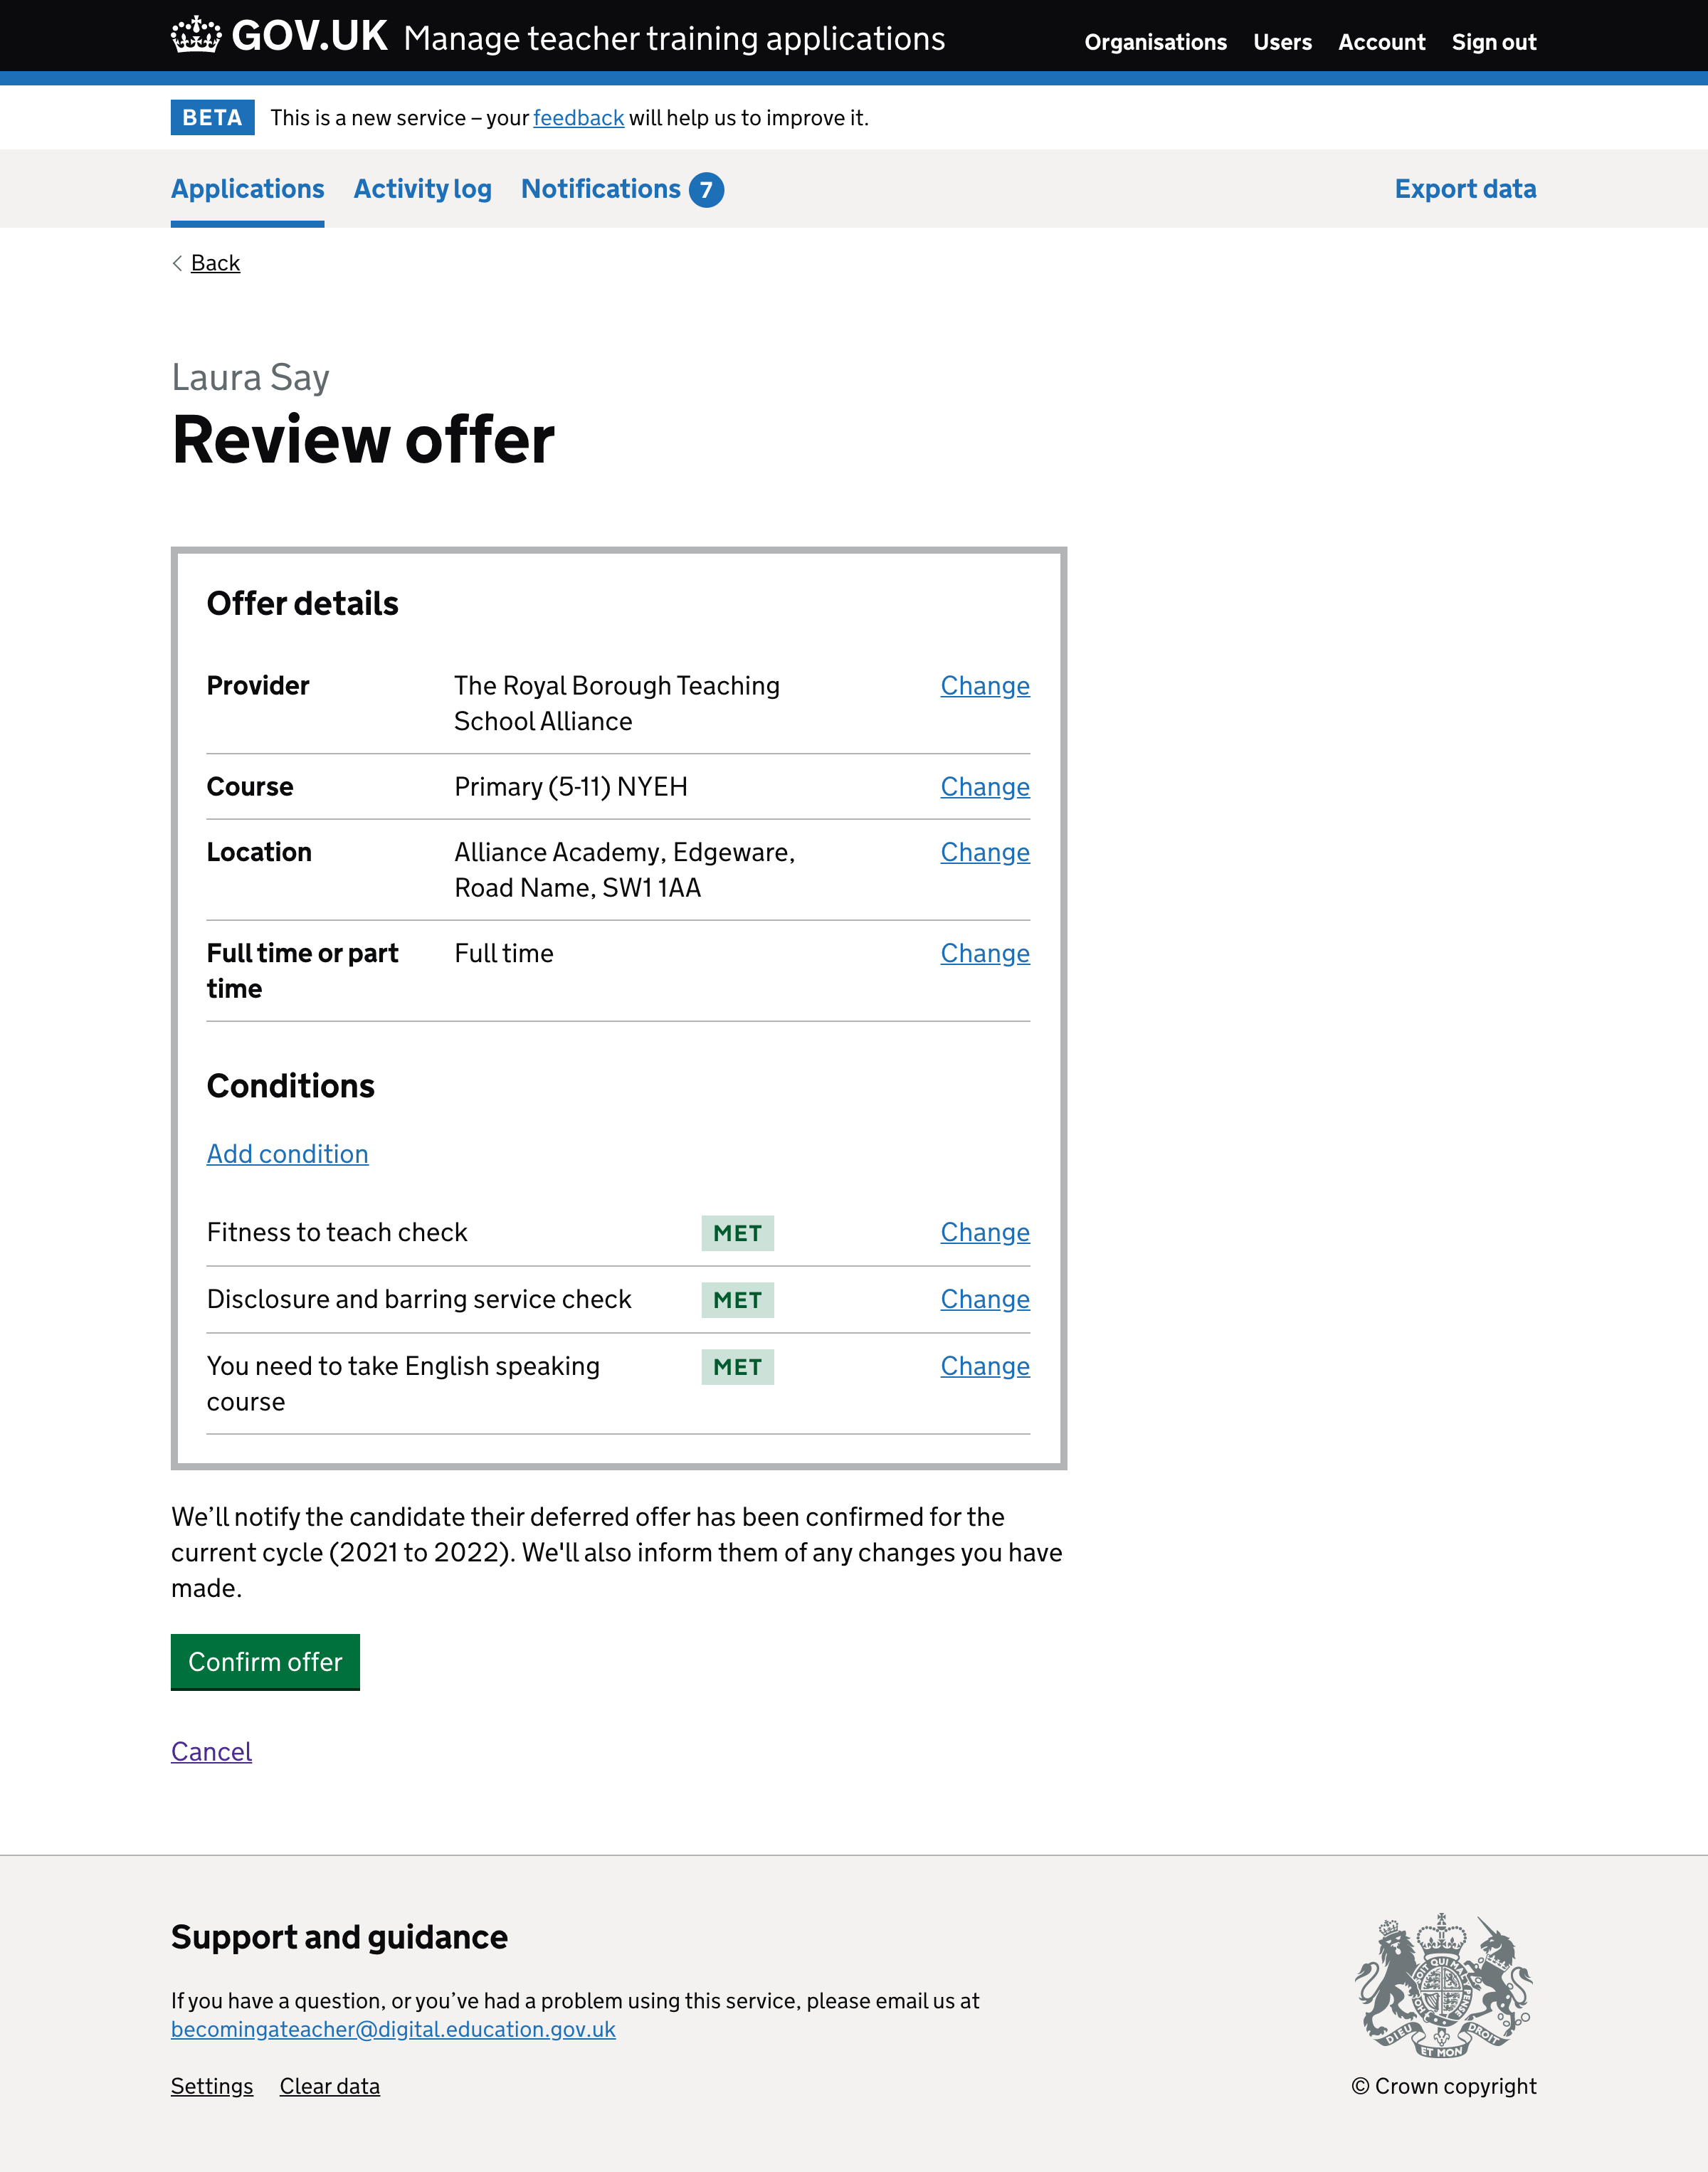 Screenshot of ‘Review offer’ page.